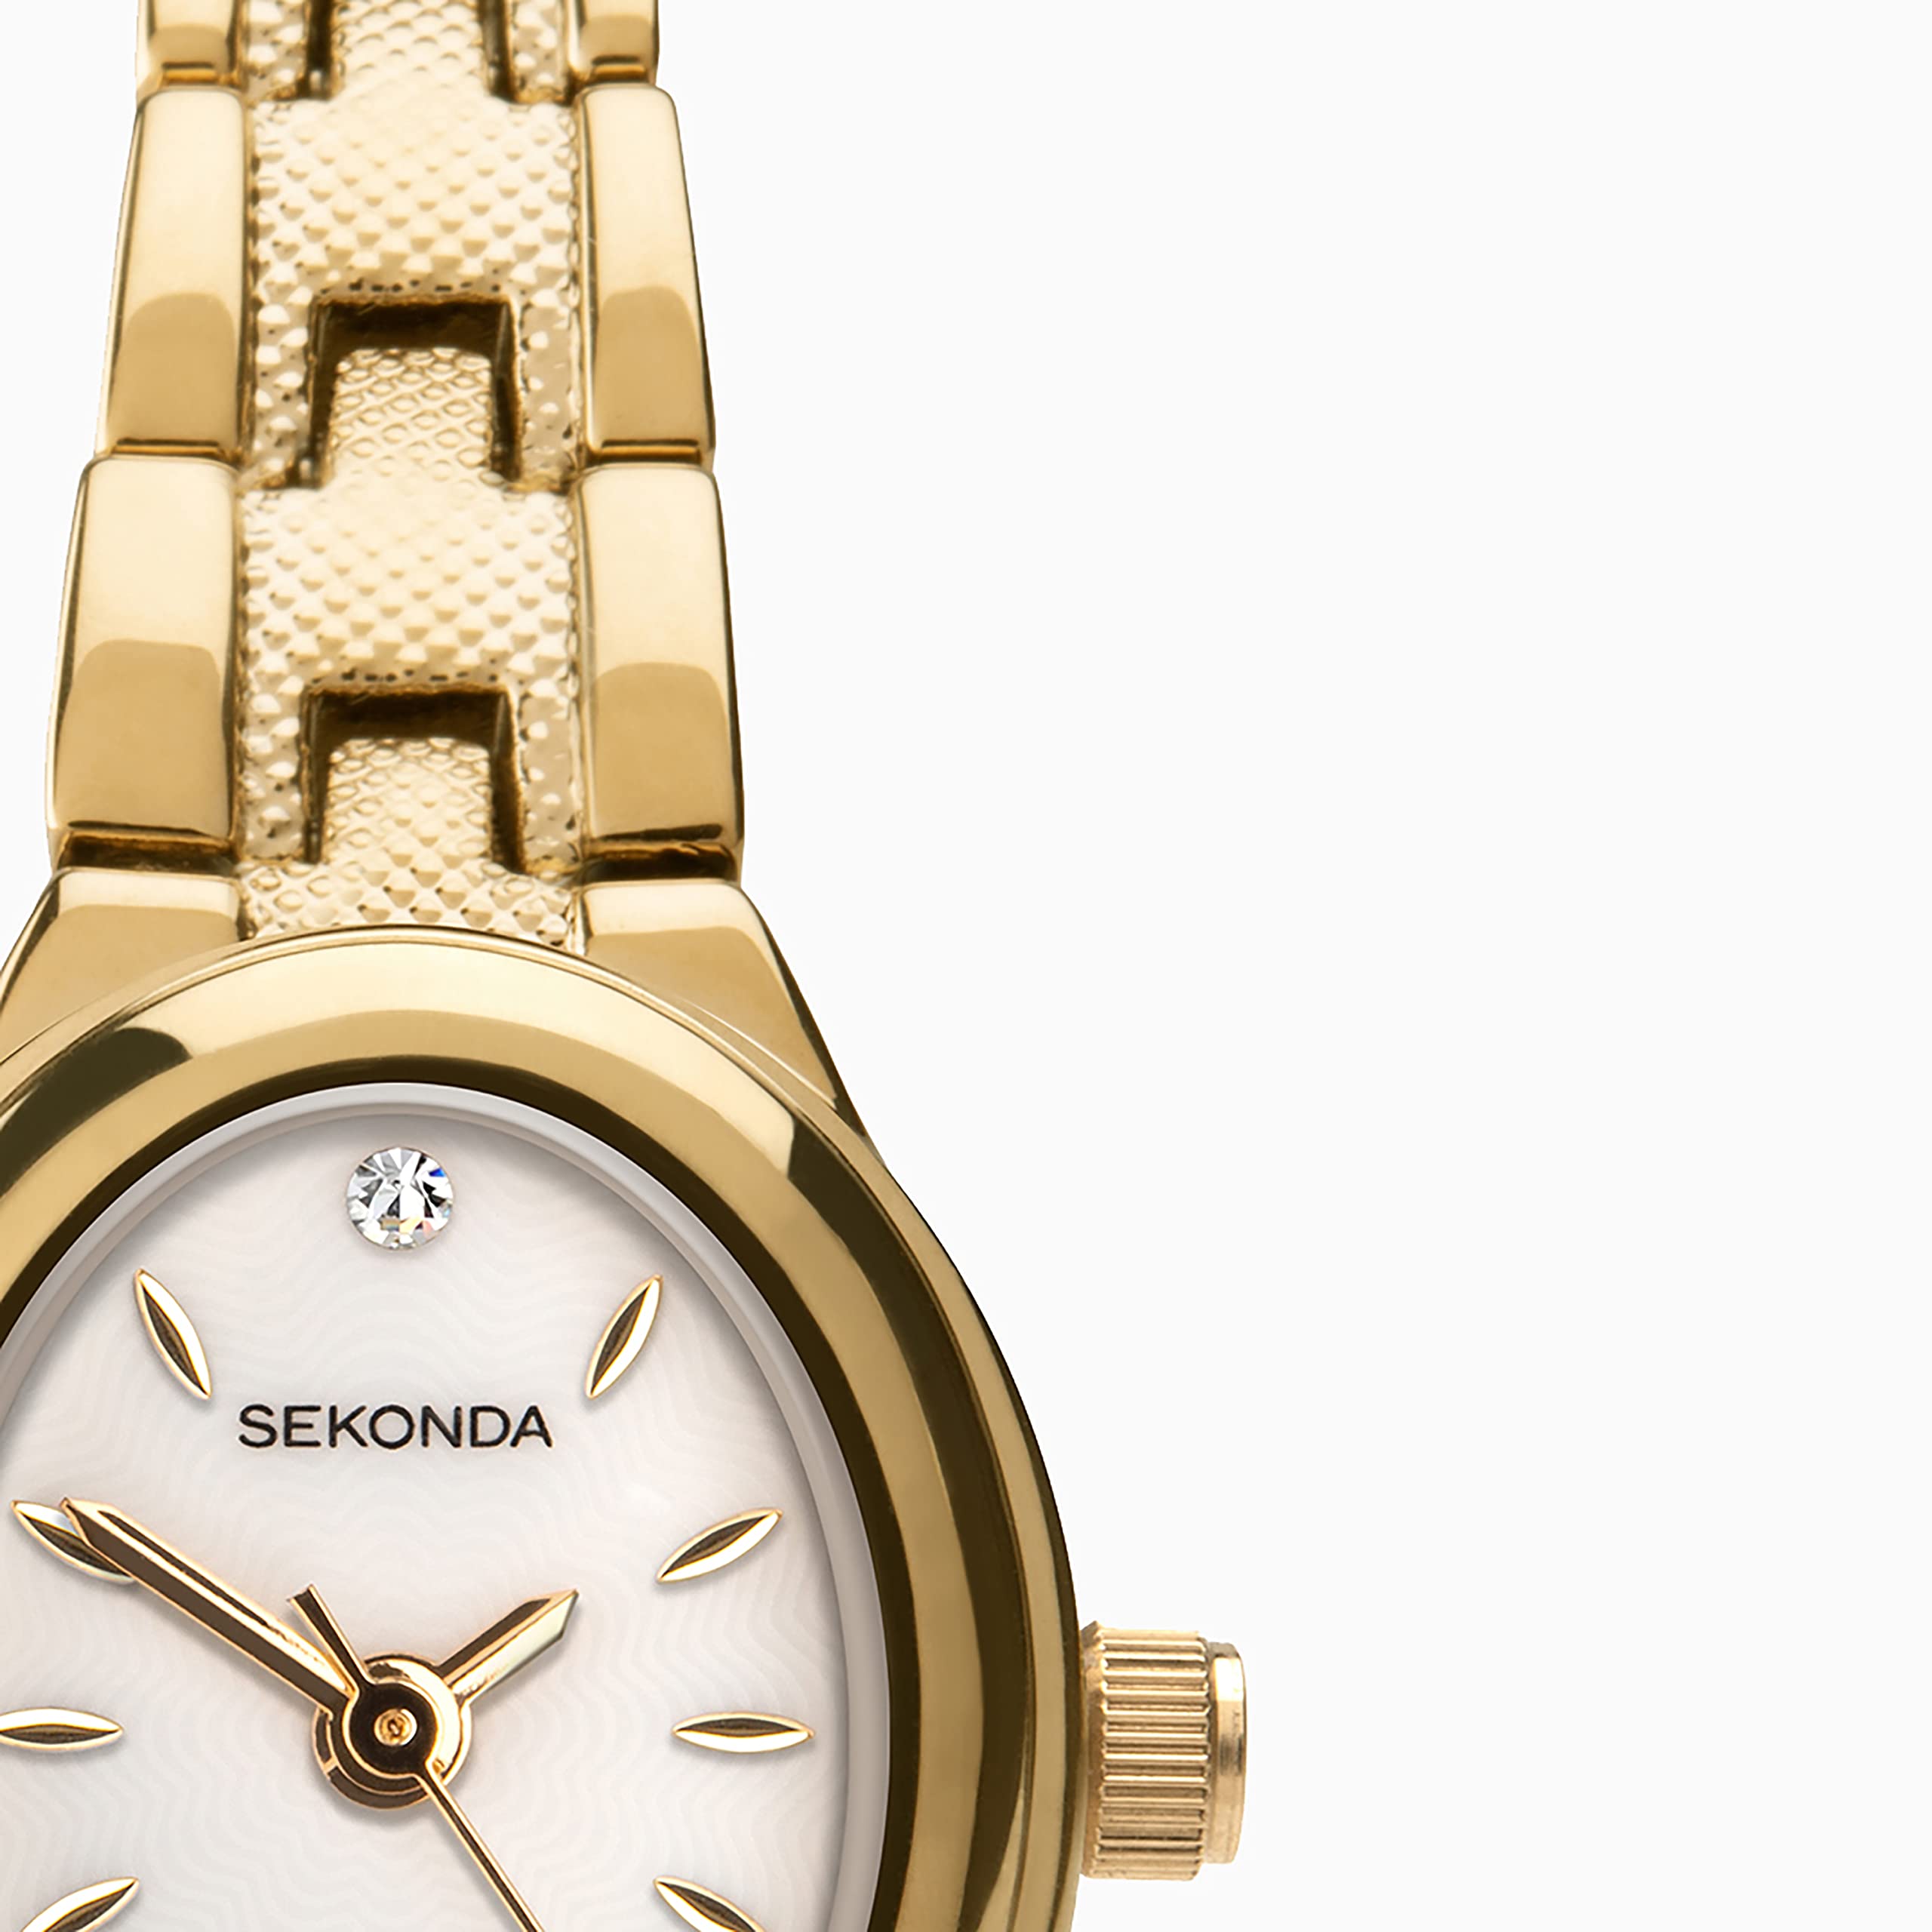 Sekonda 18mm Women's Quartz Watch with Oval Mother of Pearl Dial and Gold Alloy Foldover Clasp Bracelet